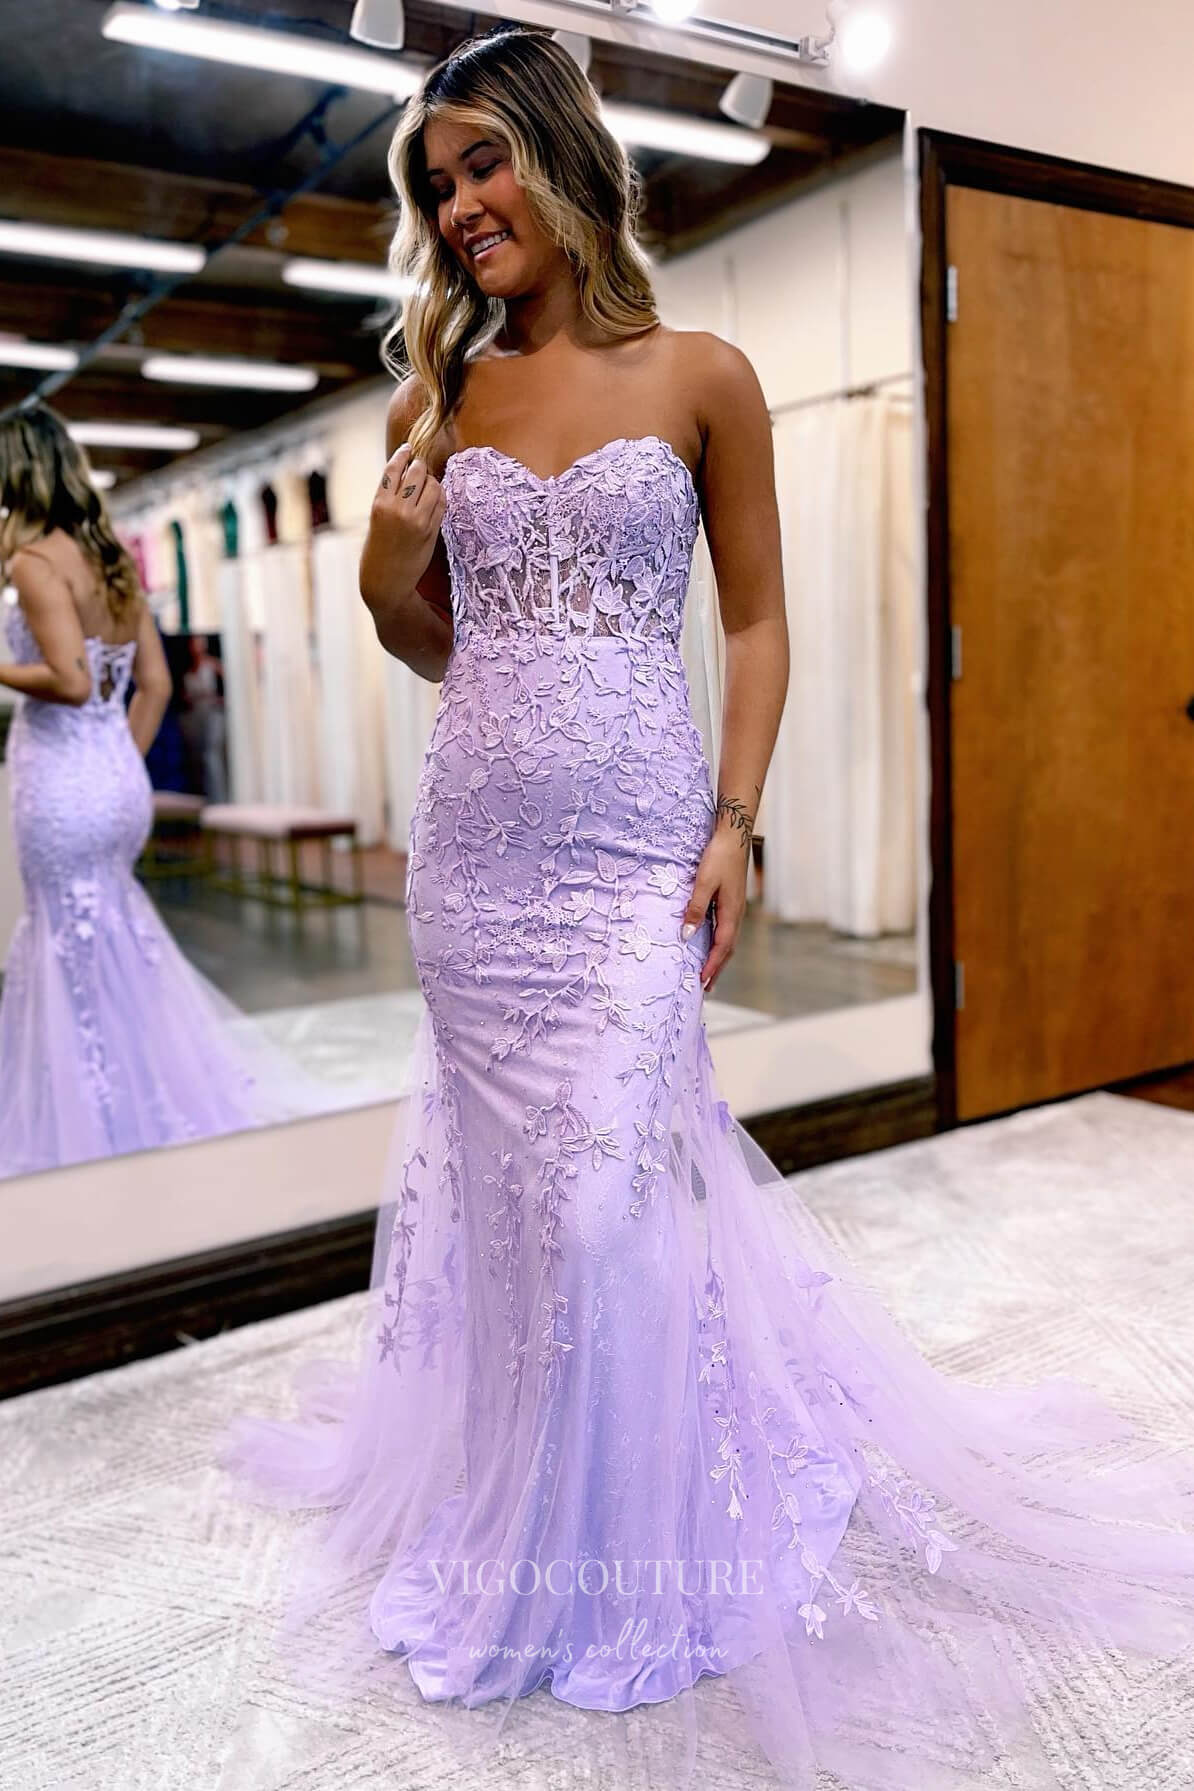 Strapless Lace Applique Prom Dresses with Corset Back Mermaid Evening –  vigocouture